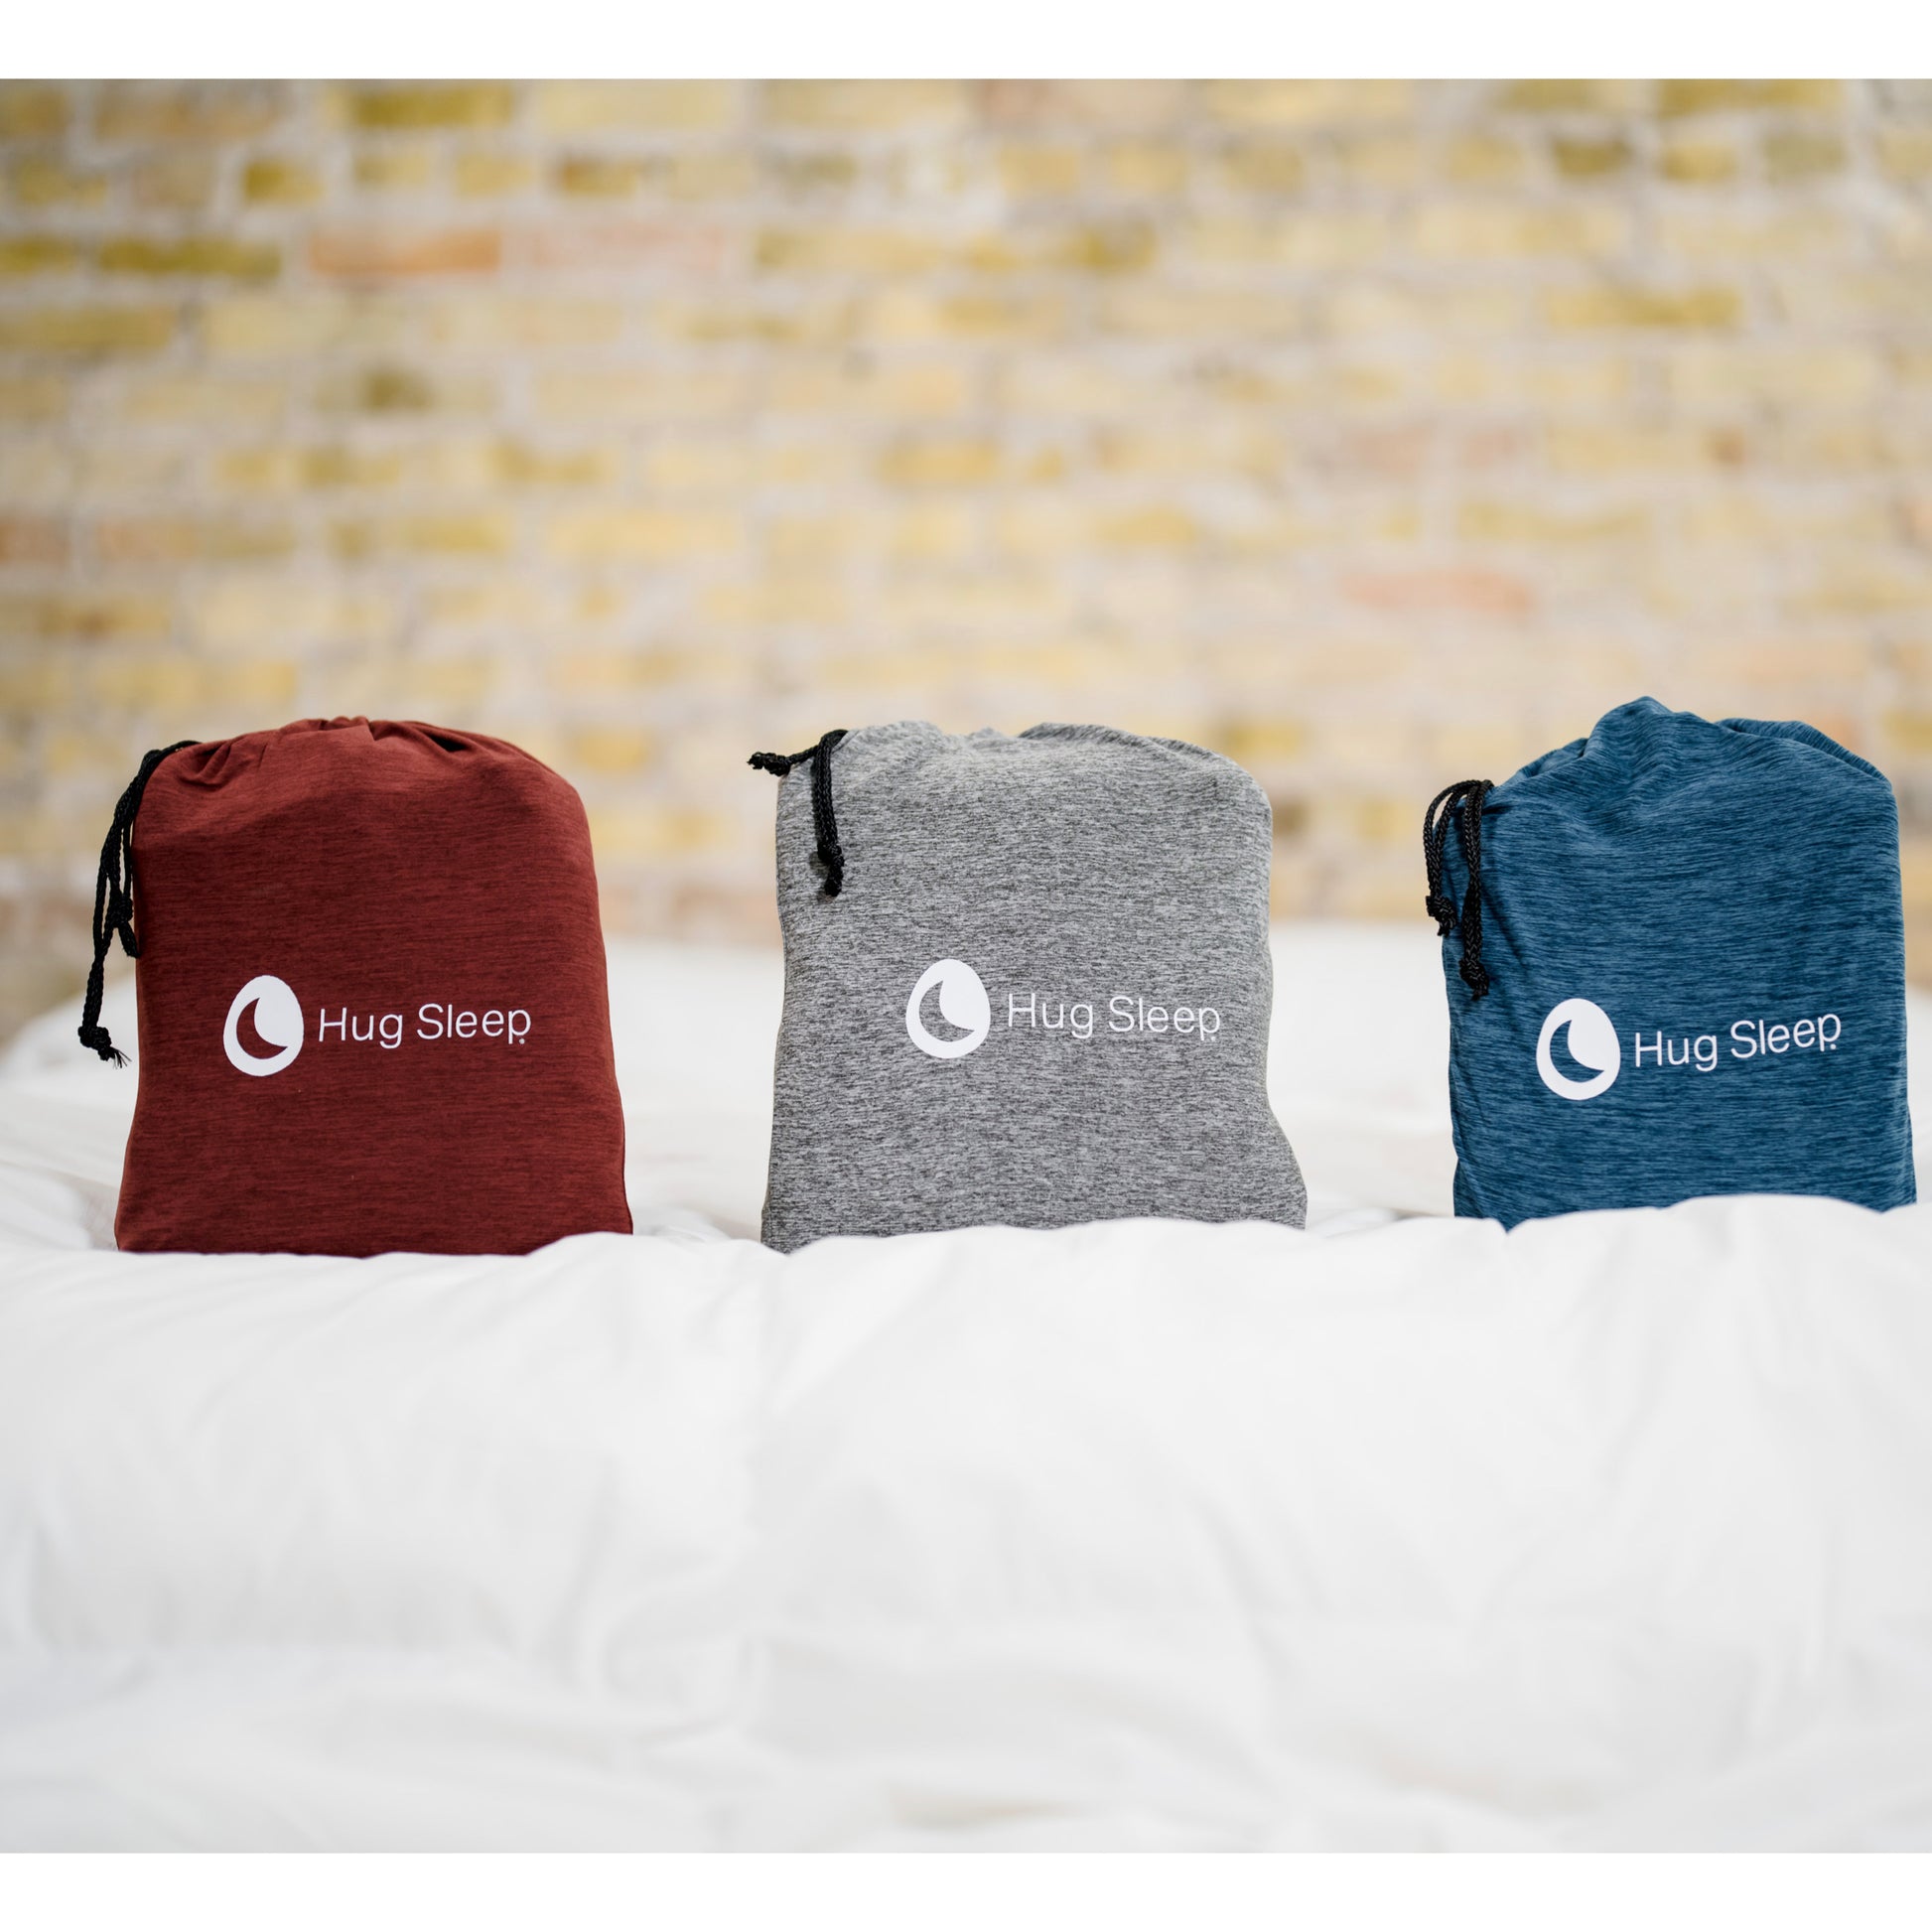 showing all three bag colors